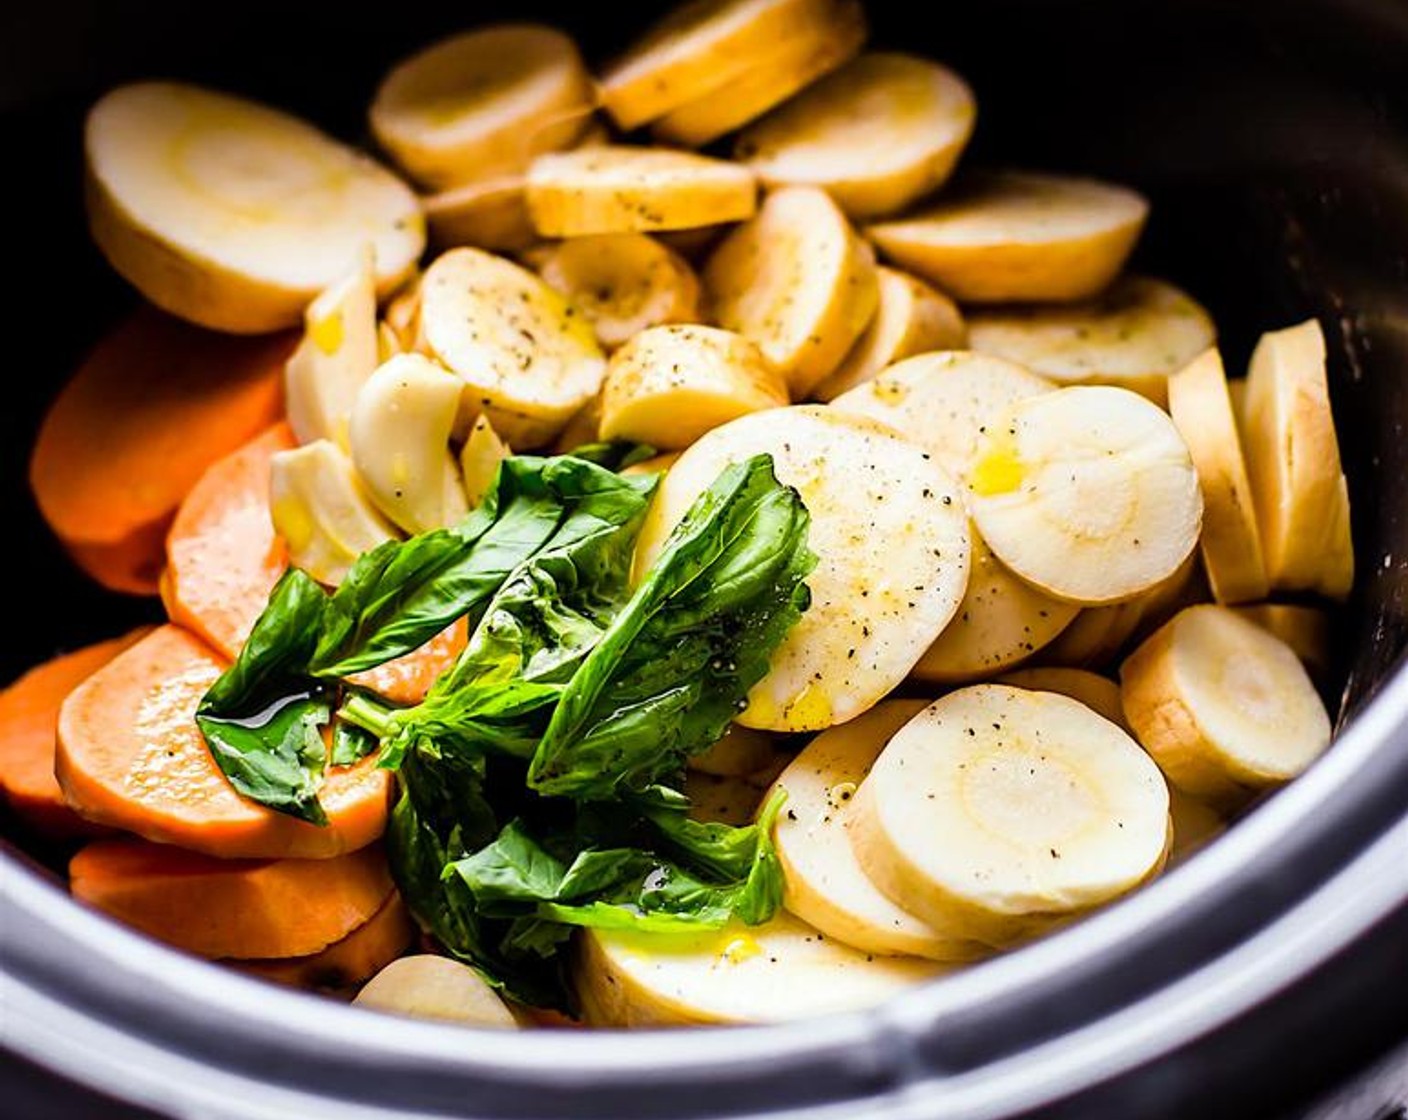 step 2 Place veggies in crock pot with Chicken Broth (1 1/2 cups), Fresh Basil Leaves (4), Garlic (4 cloves), Olive Oil (1 Tbsp), Sea Salt (1 tsp) and Ground Black Pepper (1/2 tsp).